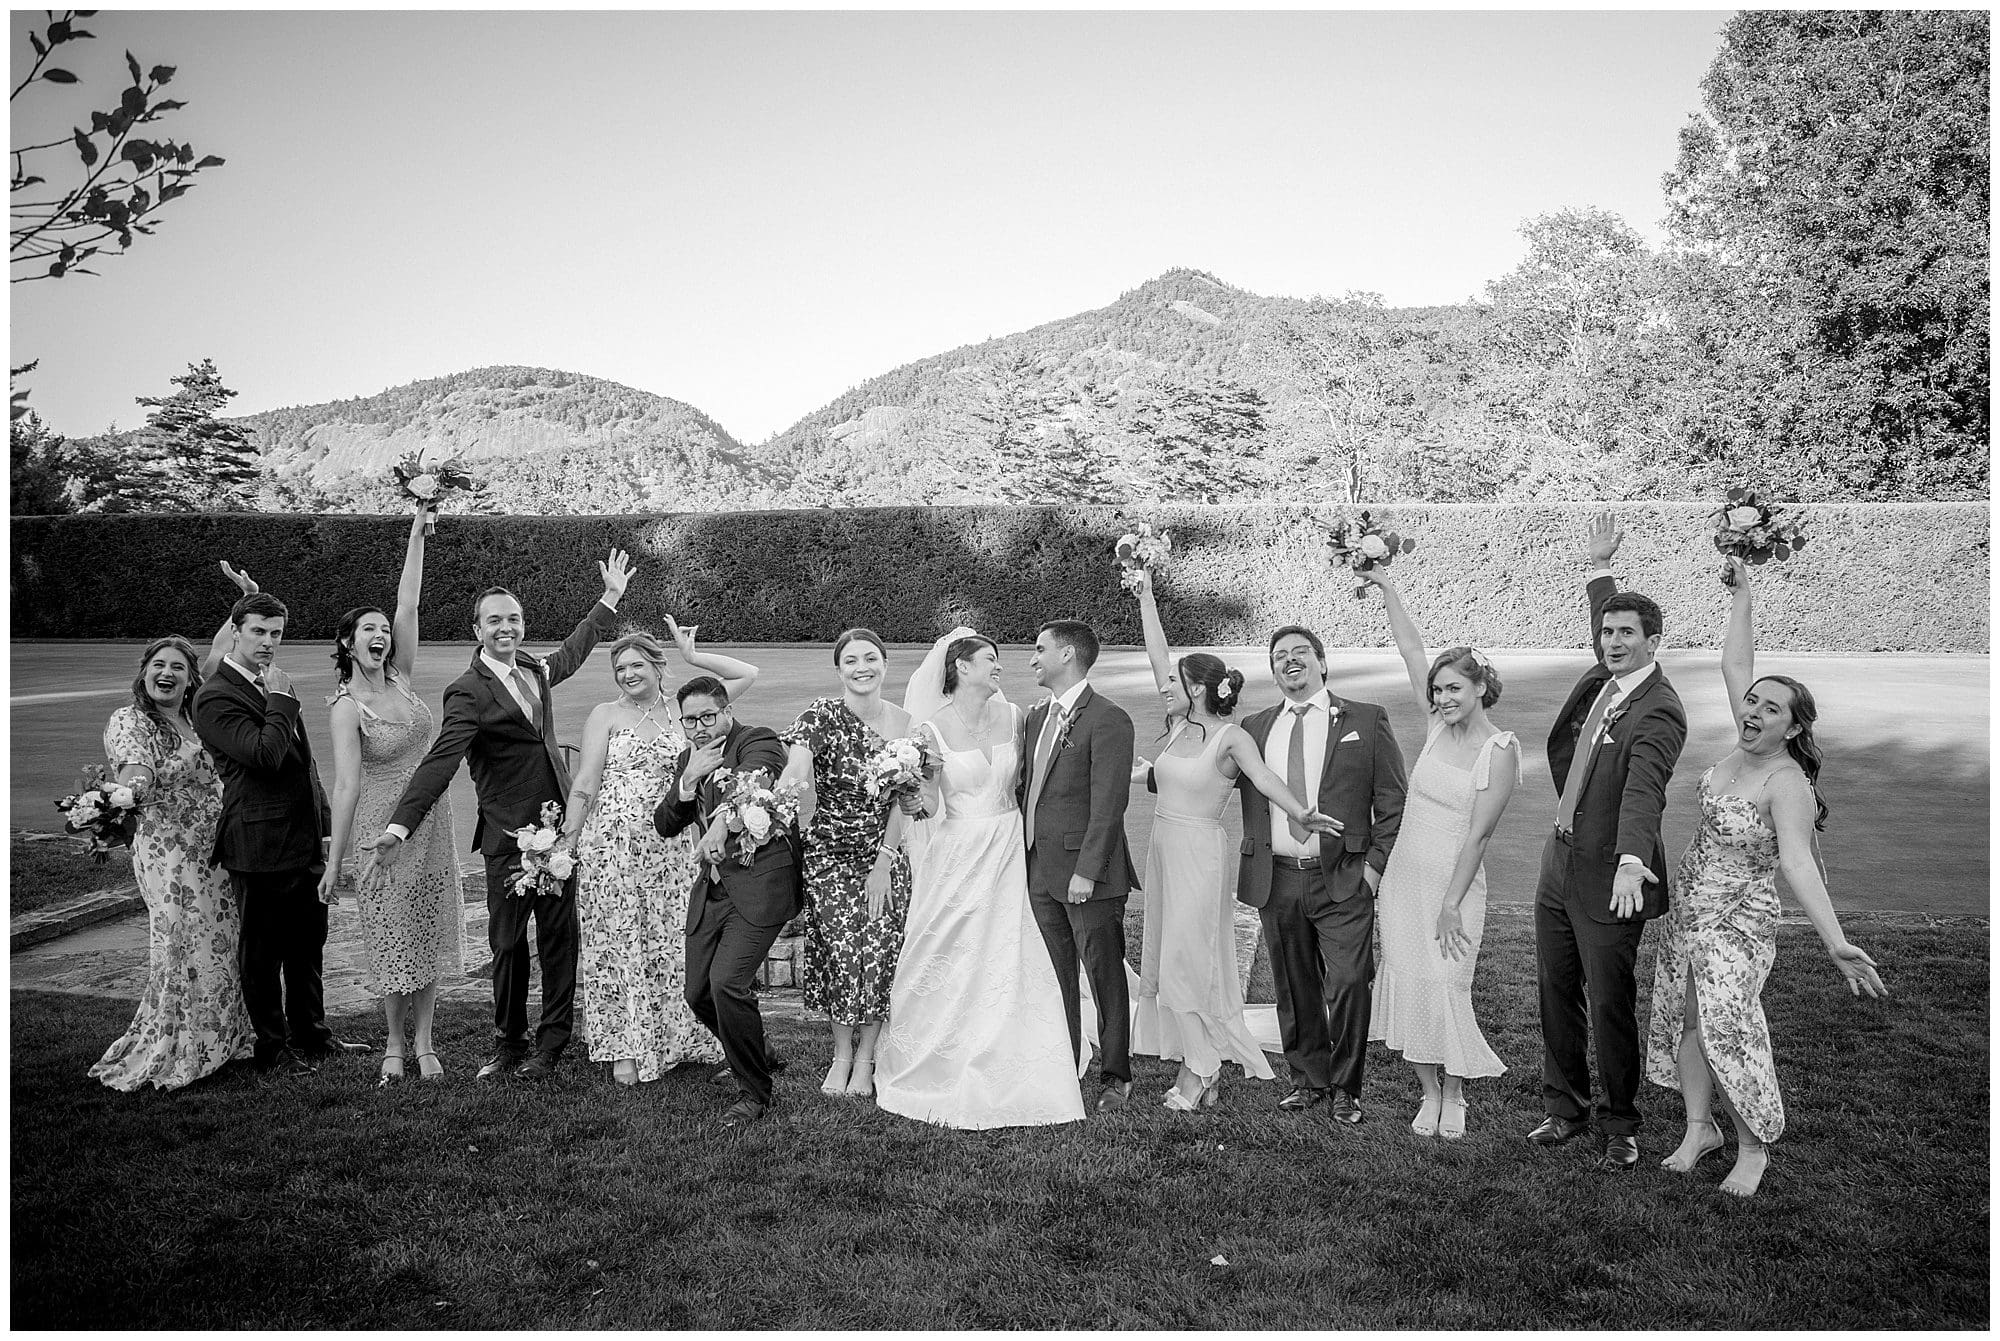 A black and white photo of a wedding party.